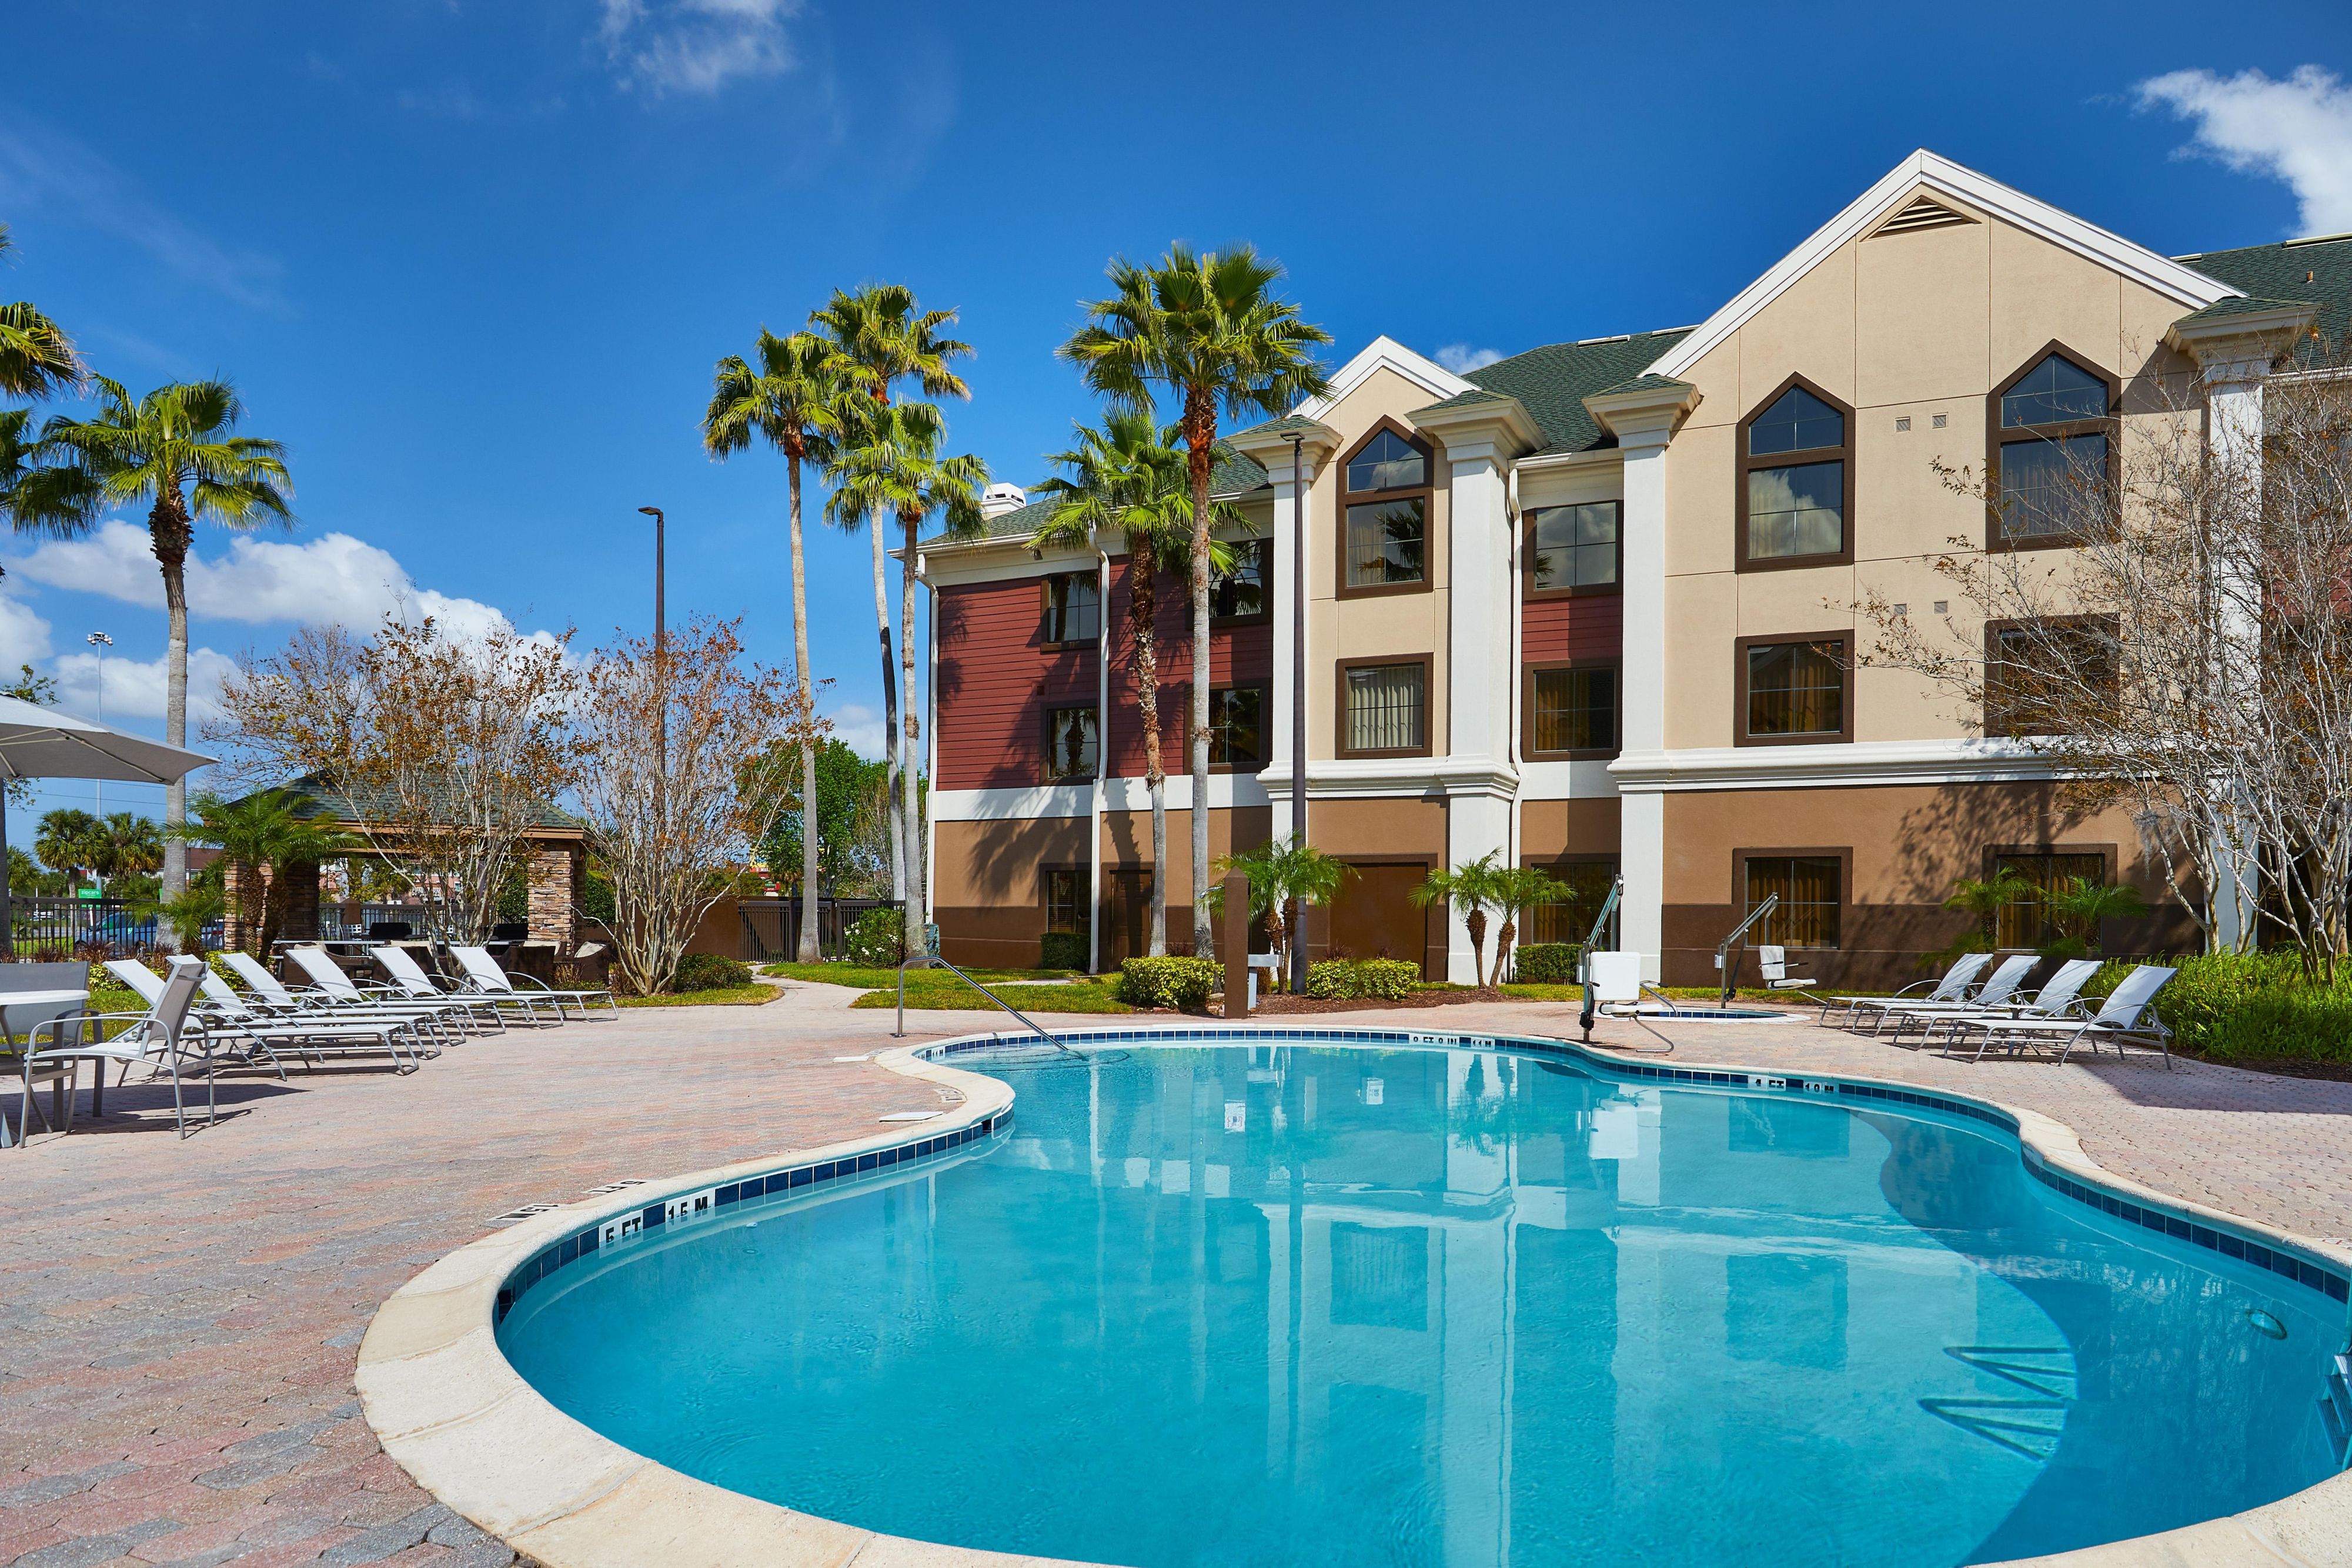 Welcome to the Staybridge Suites Orlando Airport South. Besides our spacious suites, we also provide you with access to BBQ areas, outdoor pool, and a basketball court so that you can have a  fun and productive stay at our hotel at Orlando Airport!